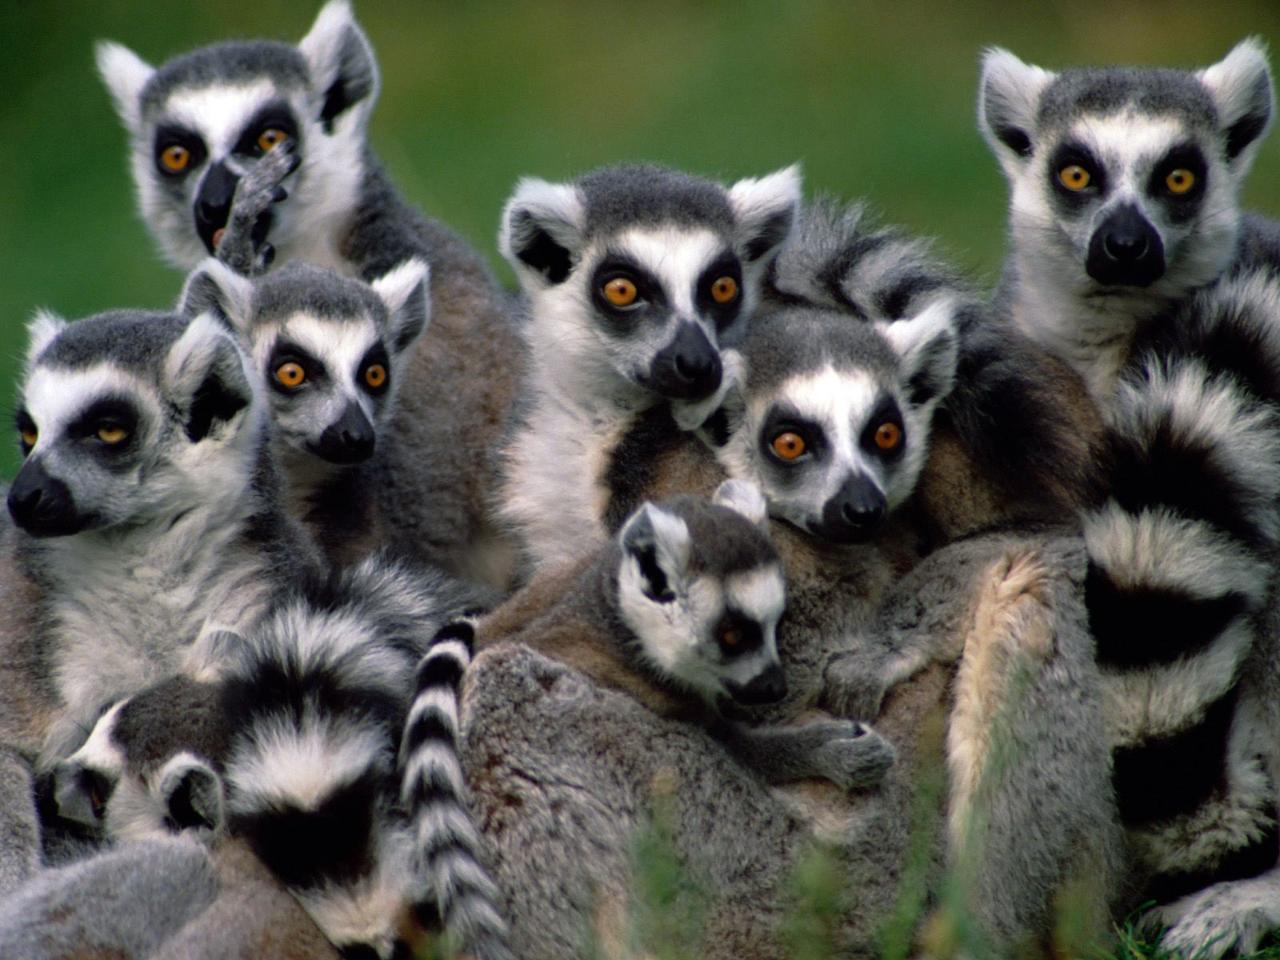 MTT Madagascar Group Tour - 15 Days - Includes Domestic Flight and All Food Except Lunches - South - English Group 2